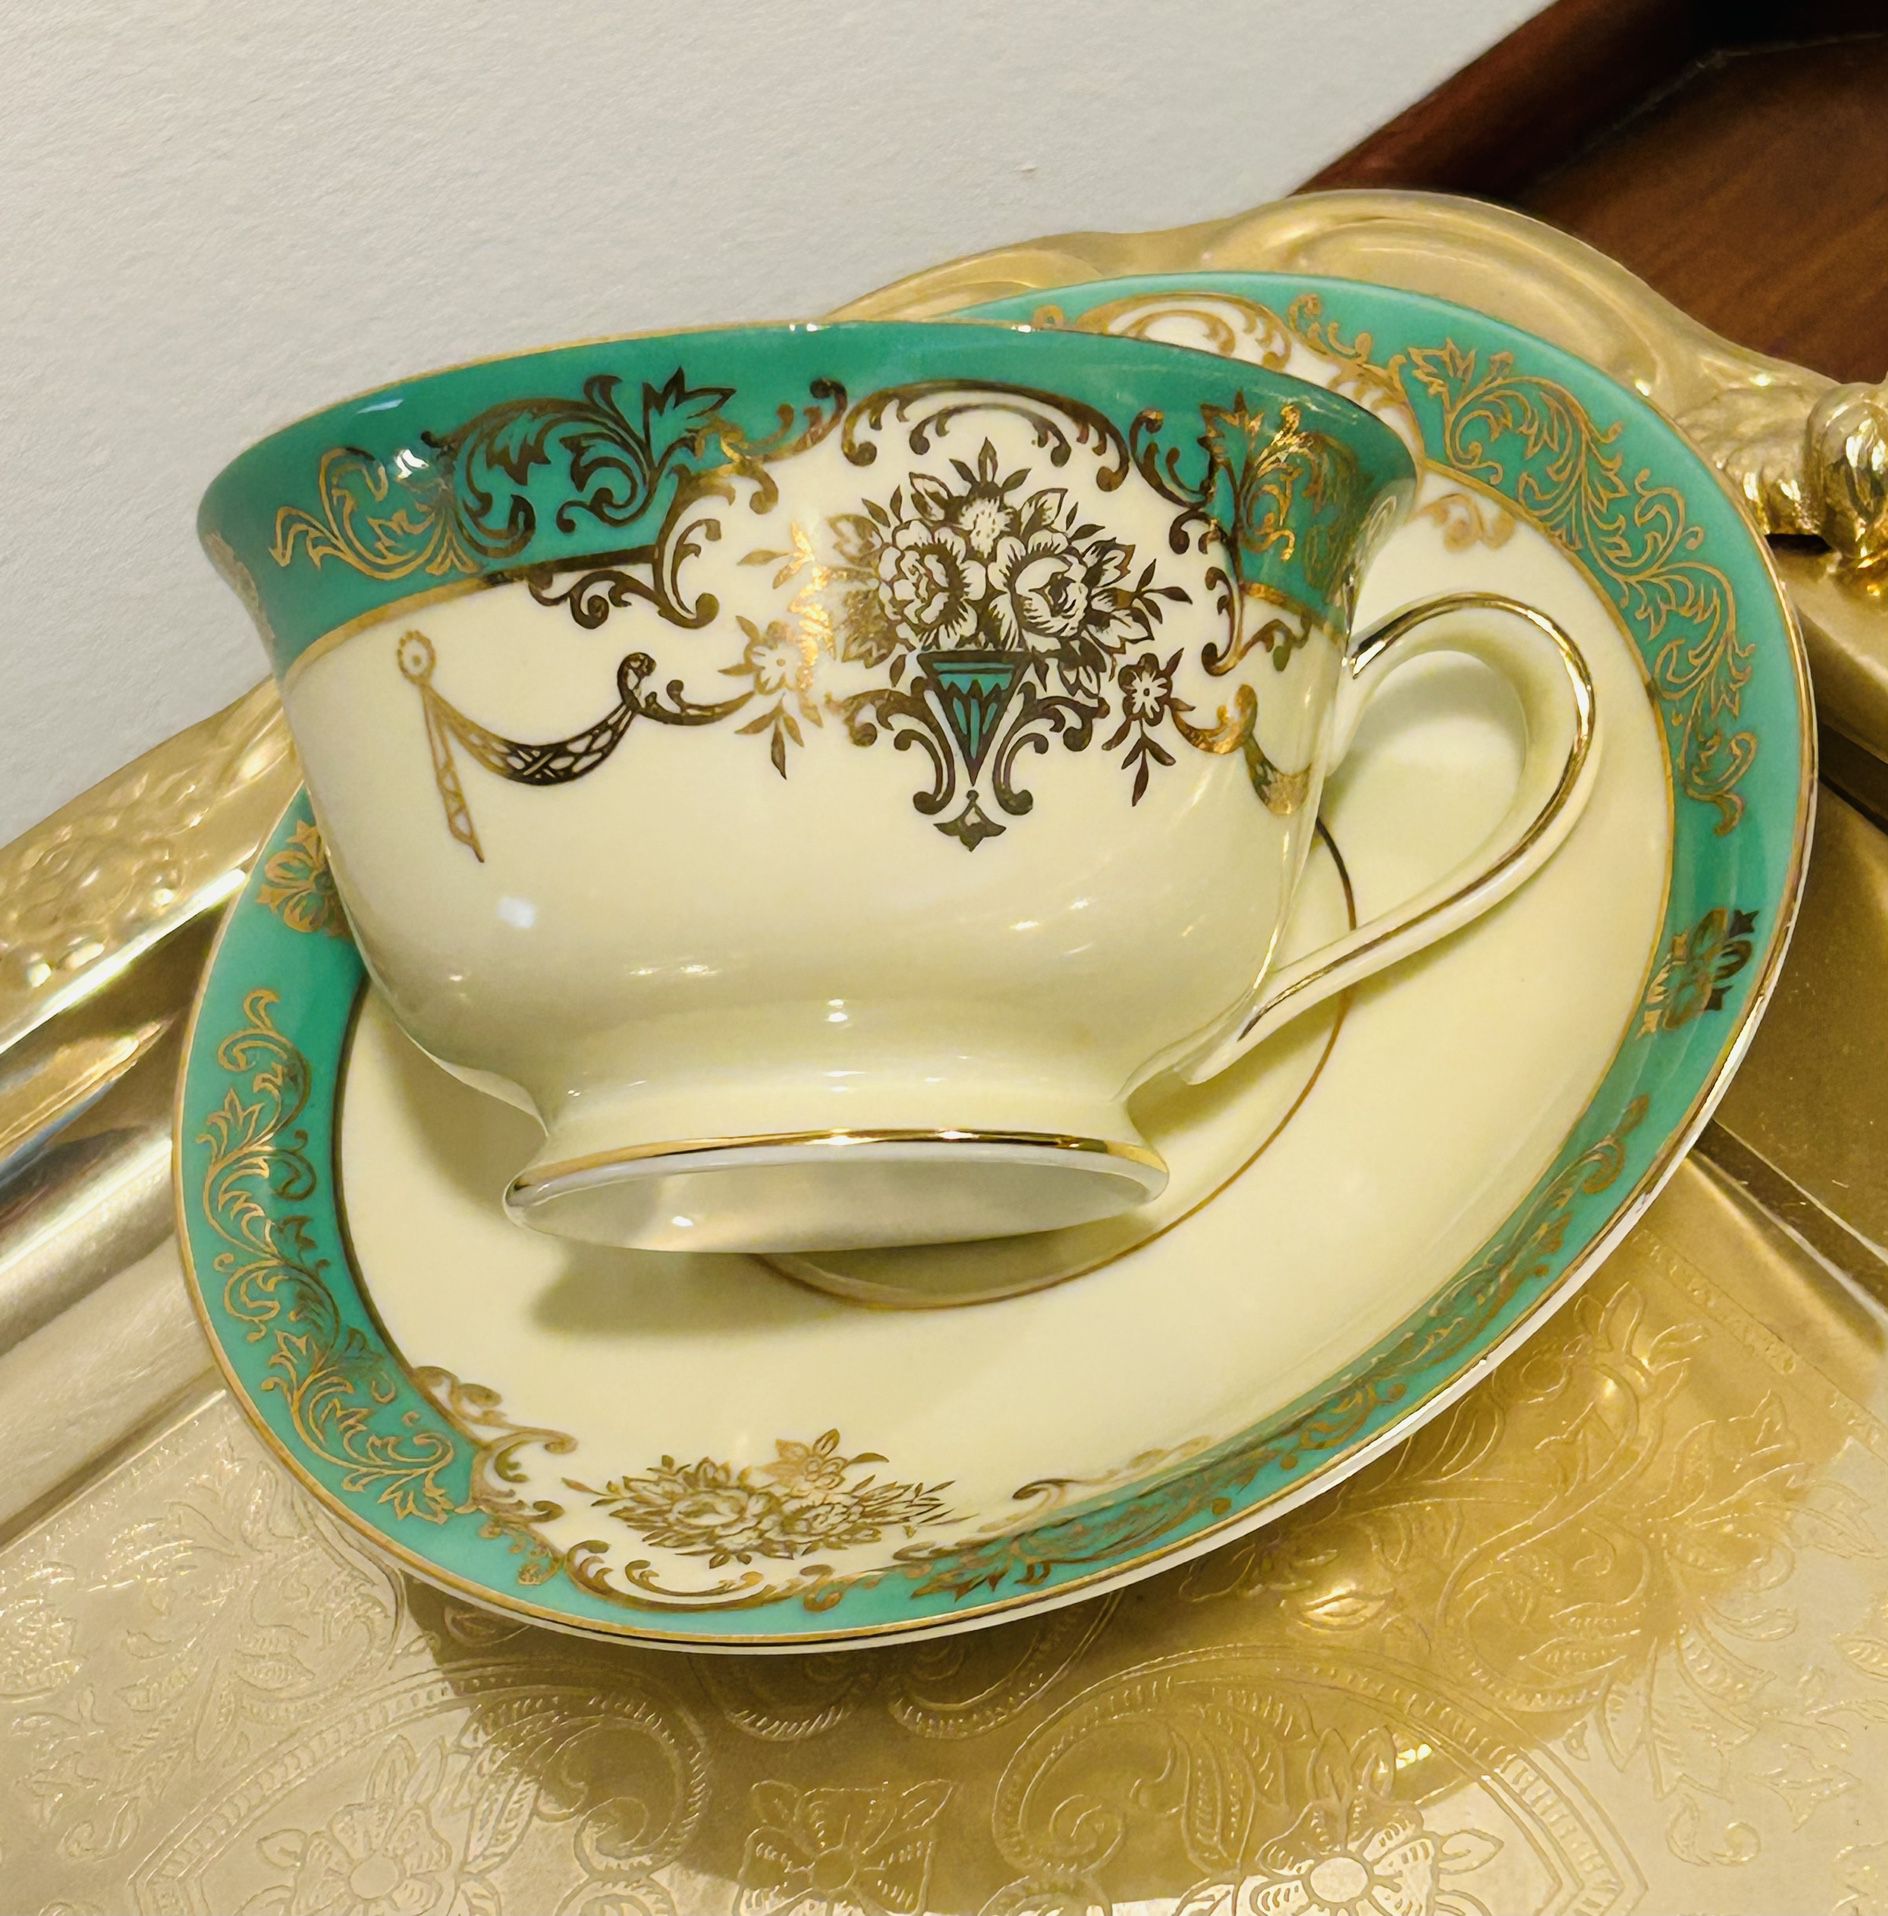 NORITAKE M Handpainted Made in Japan Teacup and Saucer 